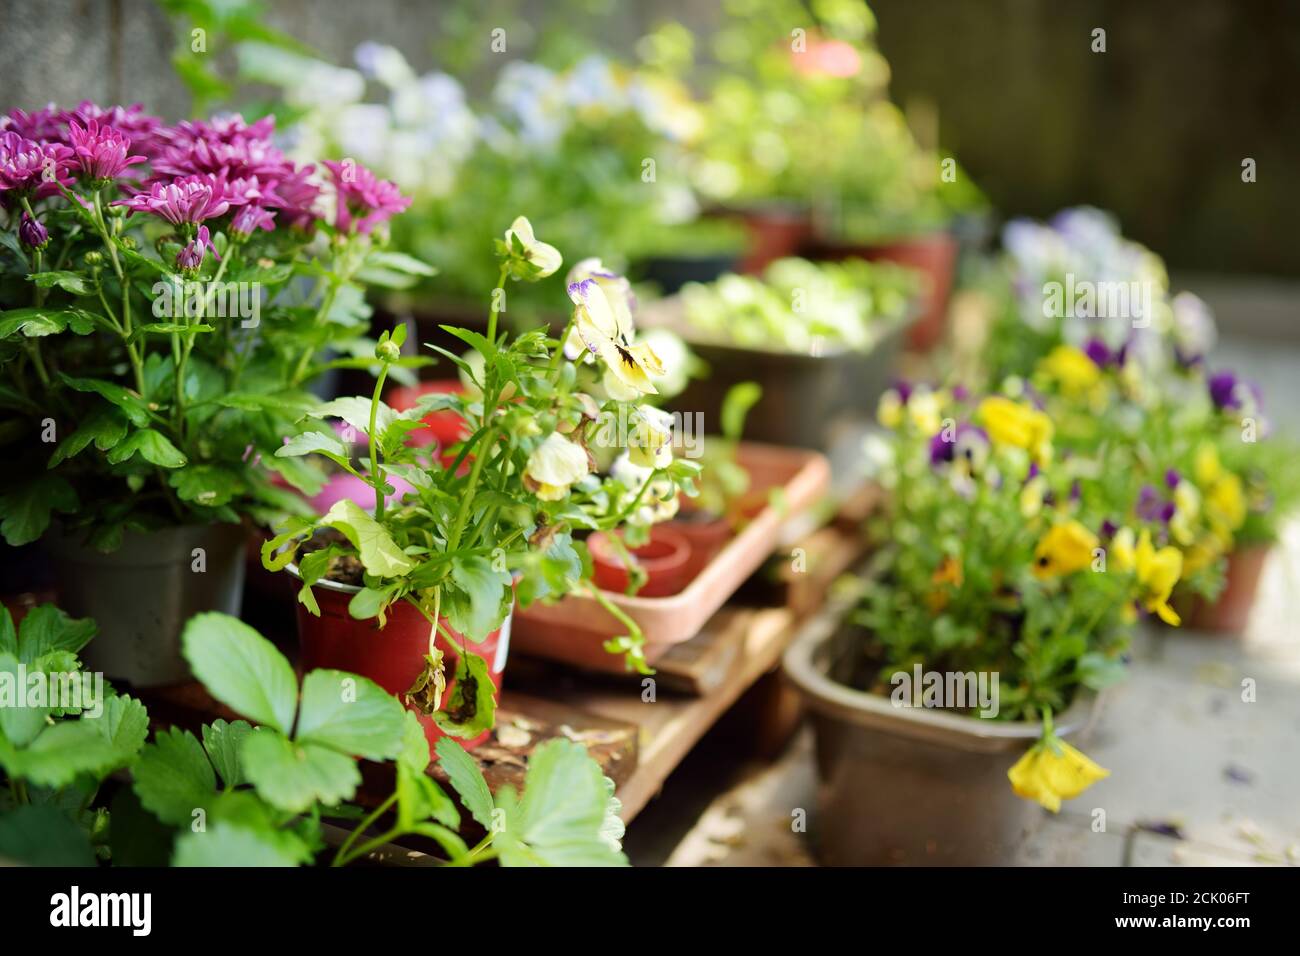 Various green plants and blossoming flowers in boxes on a doorstep. Decorating house windows at summer. Stock Photo